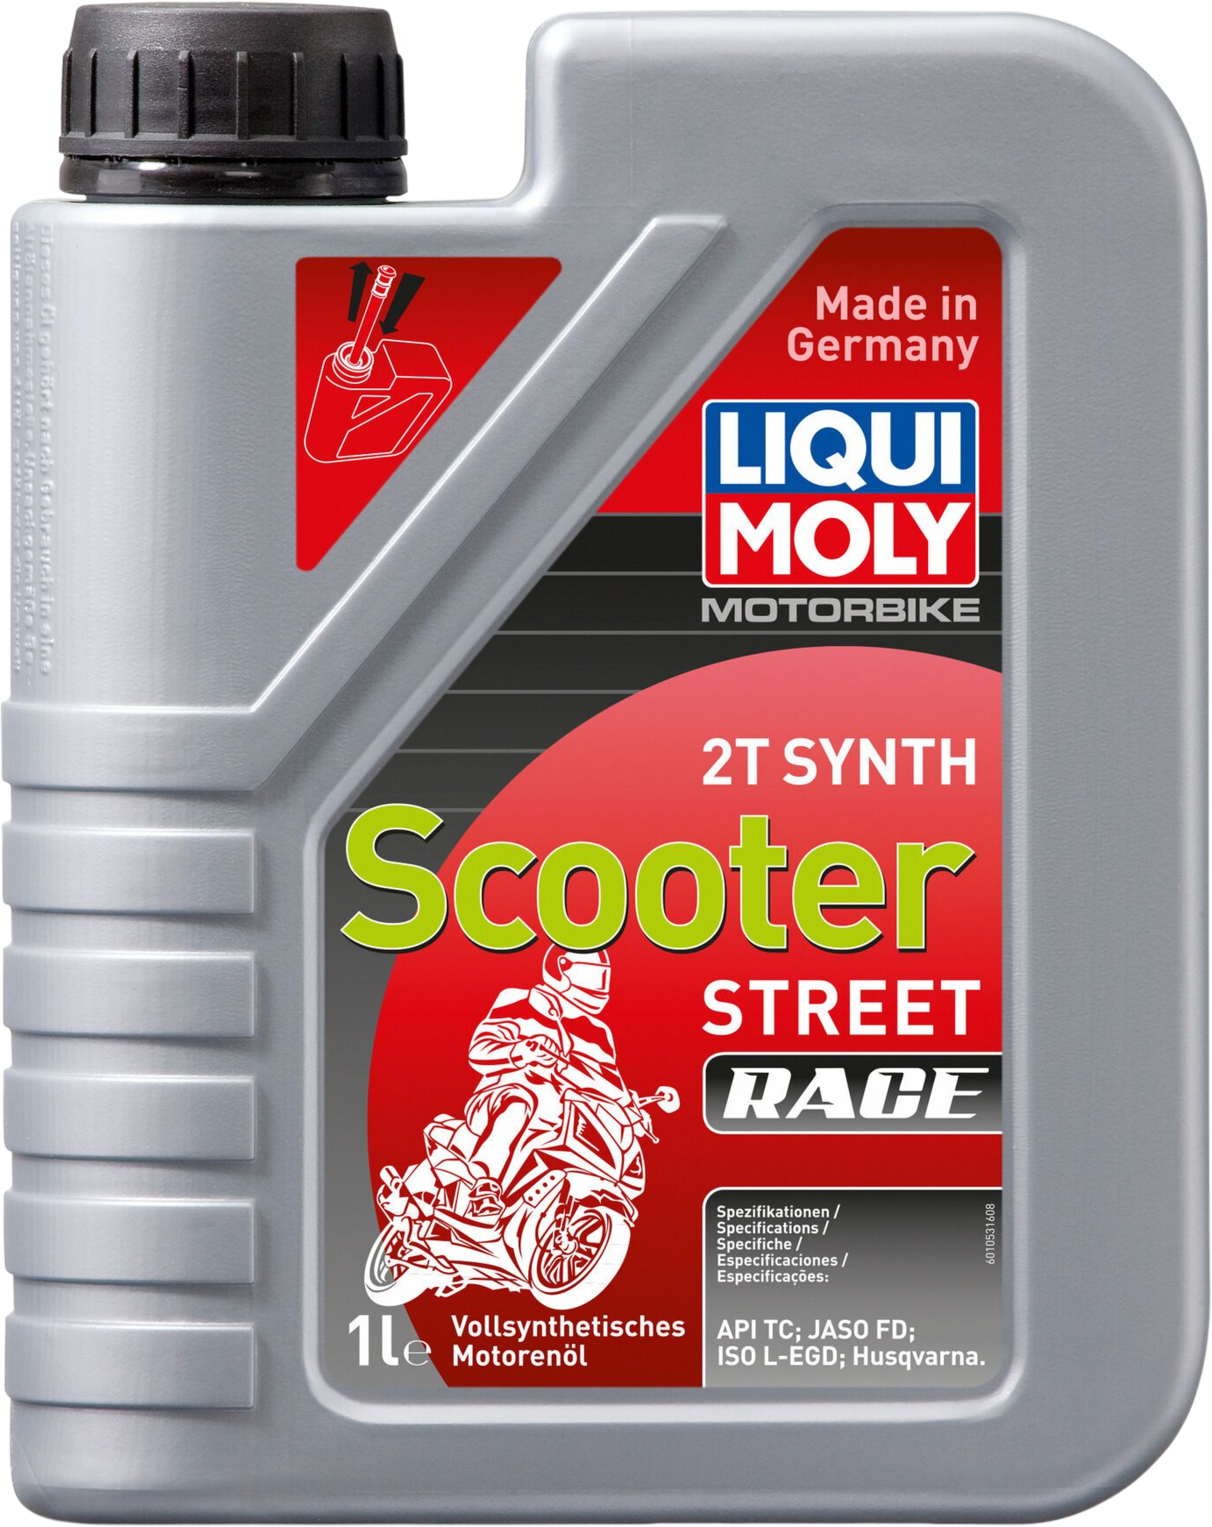 Liqui Moly Motorbike 2T Synth Scooter Street Race, 1 lt